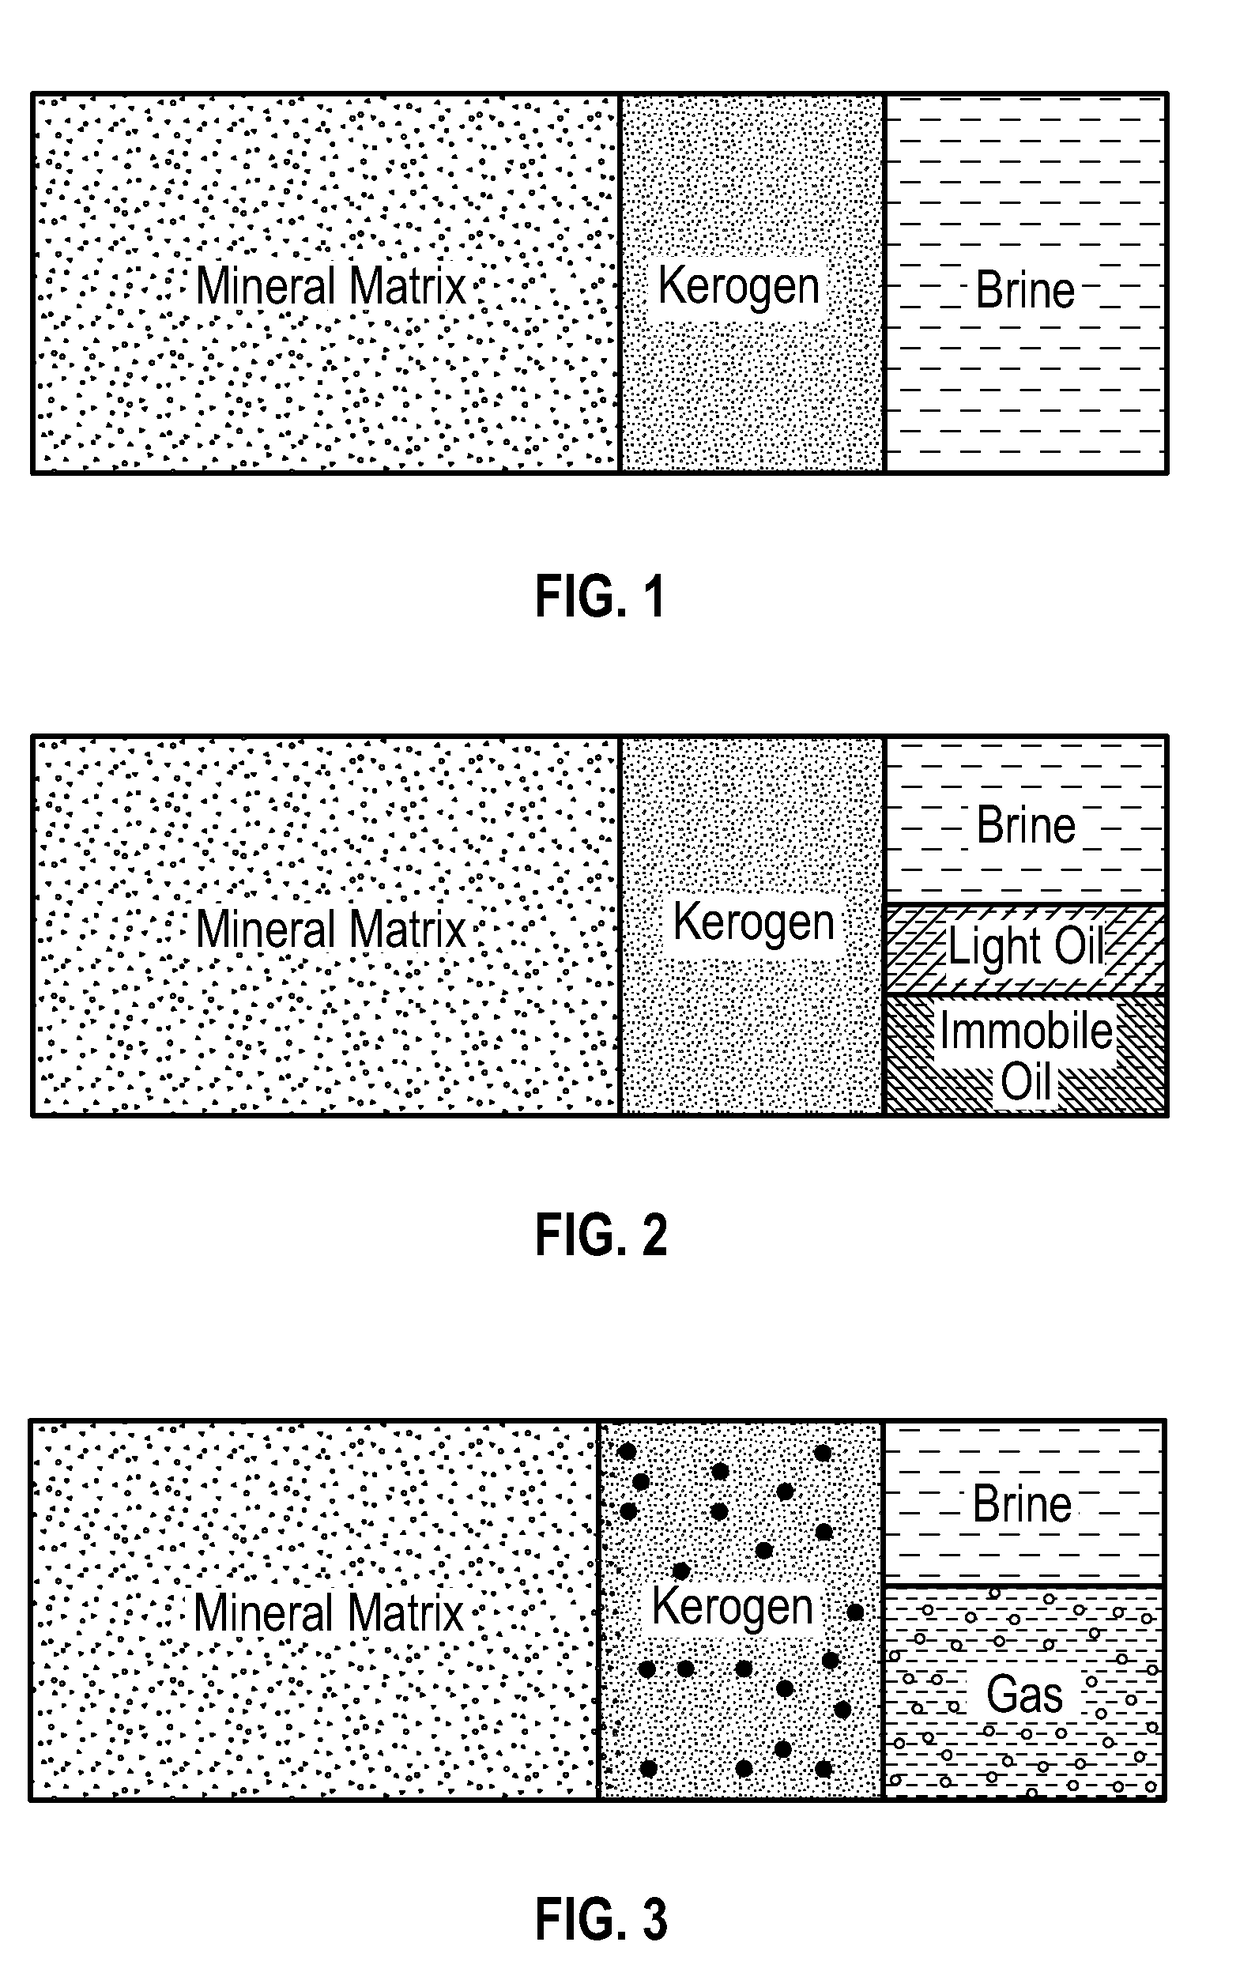 Method for formation evaluation of organic shale reservoirs using well logging data